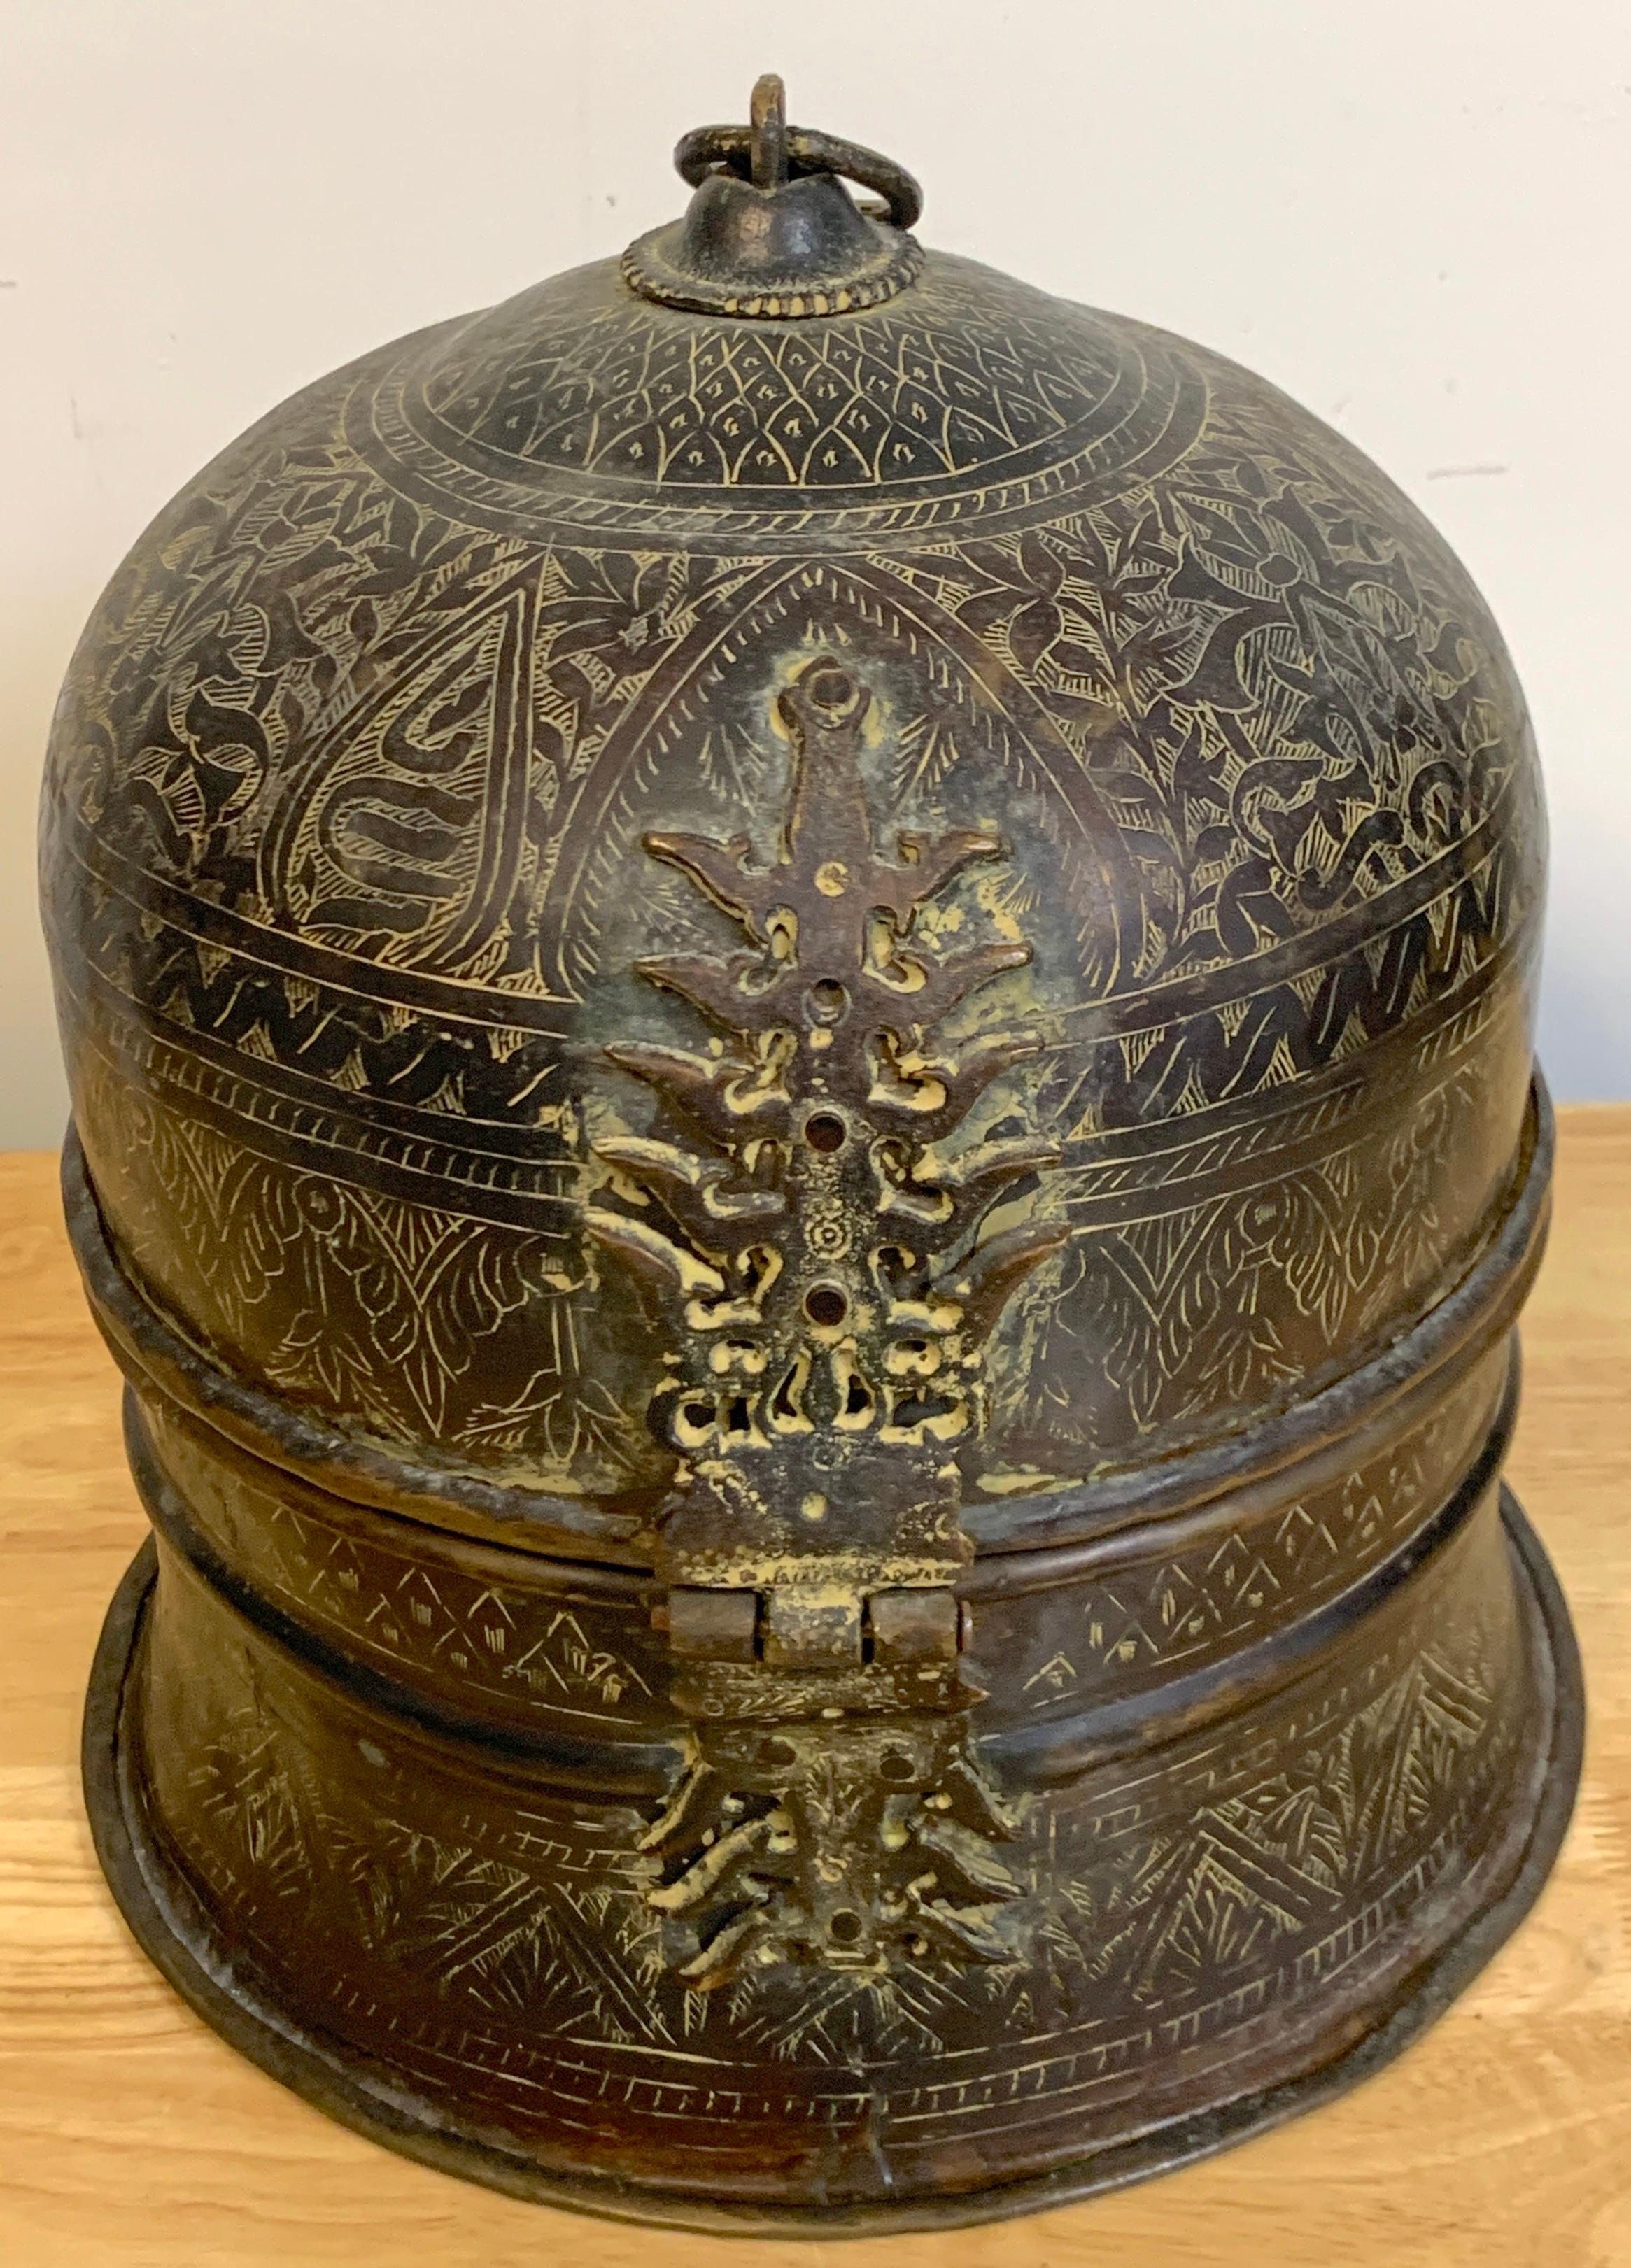 Antique Patinated & Engraved Bronze Mughal Domed Box
India, 20th century 

A fabulous Indo-Islamic architectural circular domed box, with elaborate front hinge, all over exotic fine engraved decoration. Ready to place.